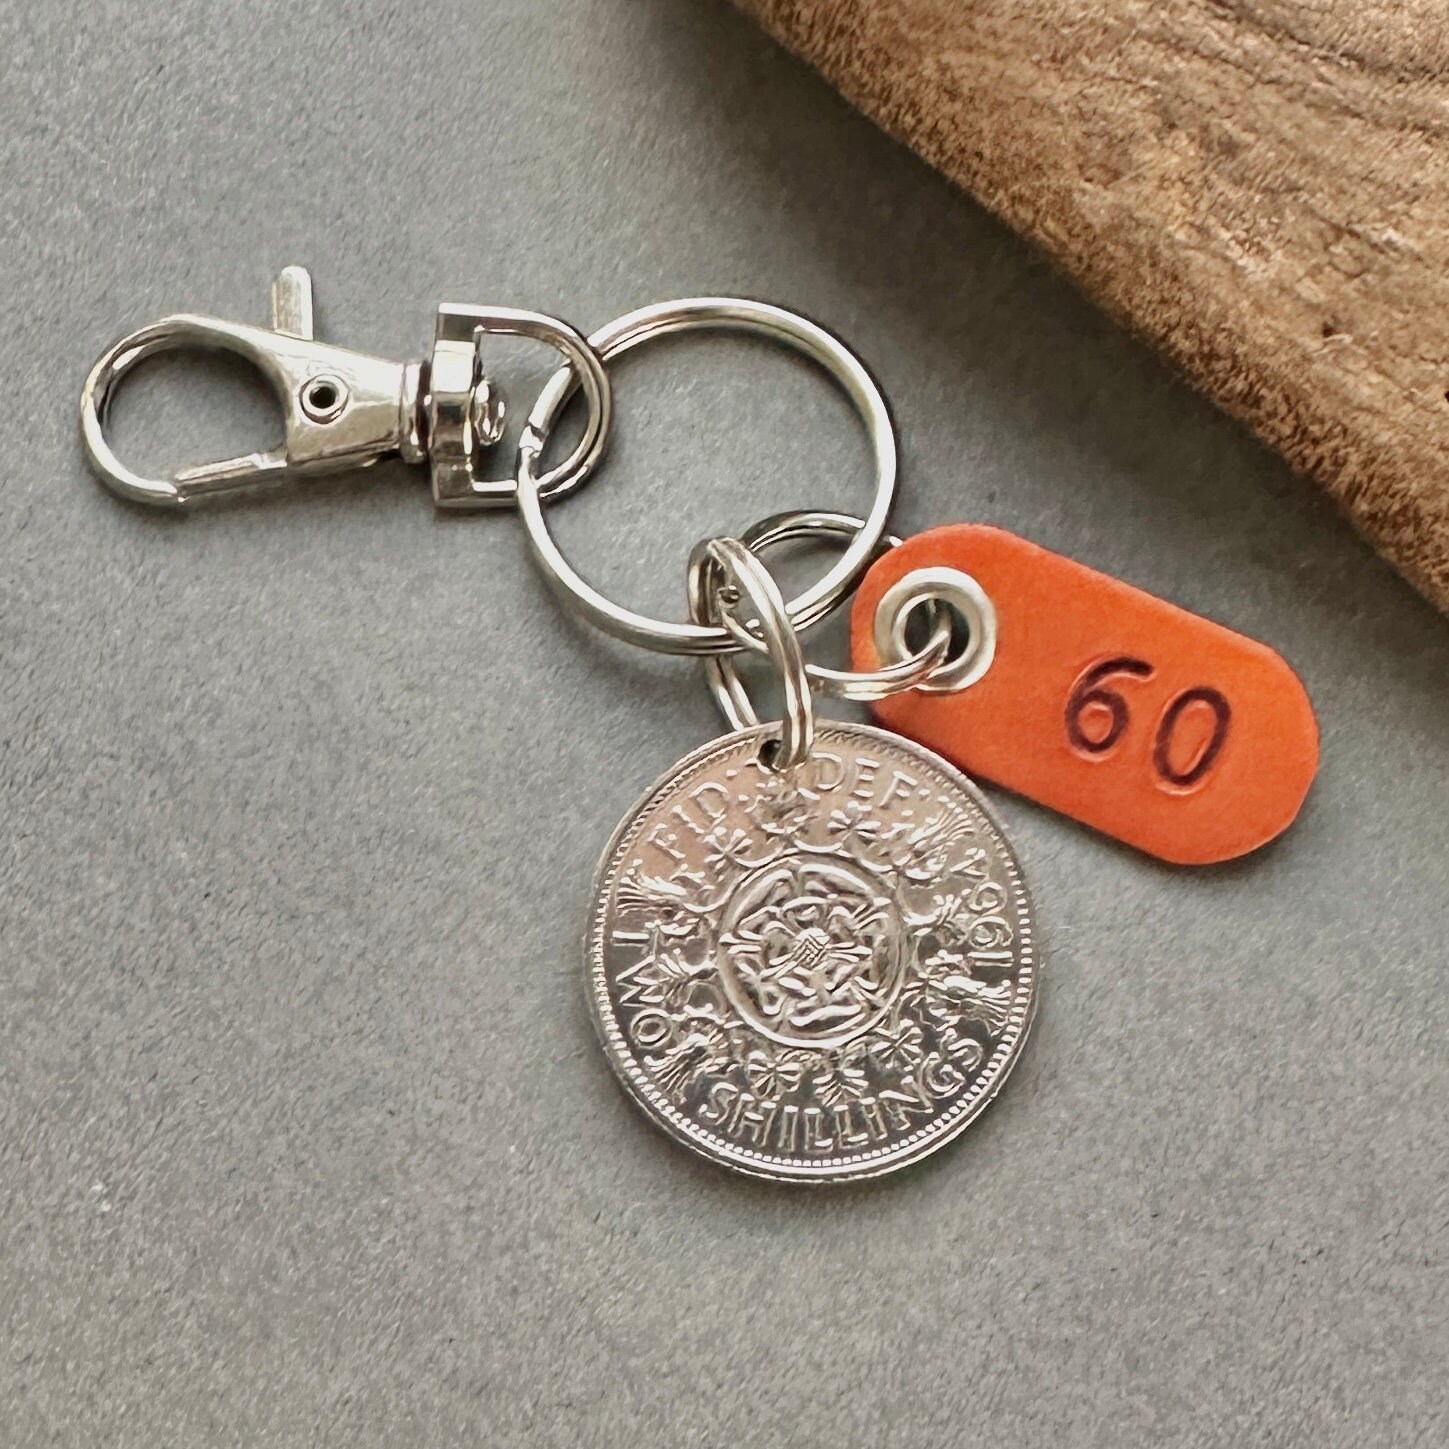 QuirkyGirlWorkshop 60th Birthday Gift, 1964 Irish Shilling Key Chain, Keyring or Clip, A Perfect 60th Anniversary Gift, for Some Who's Heart Is in Ireland